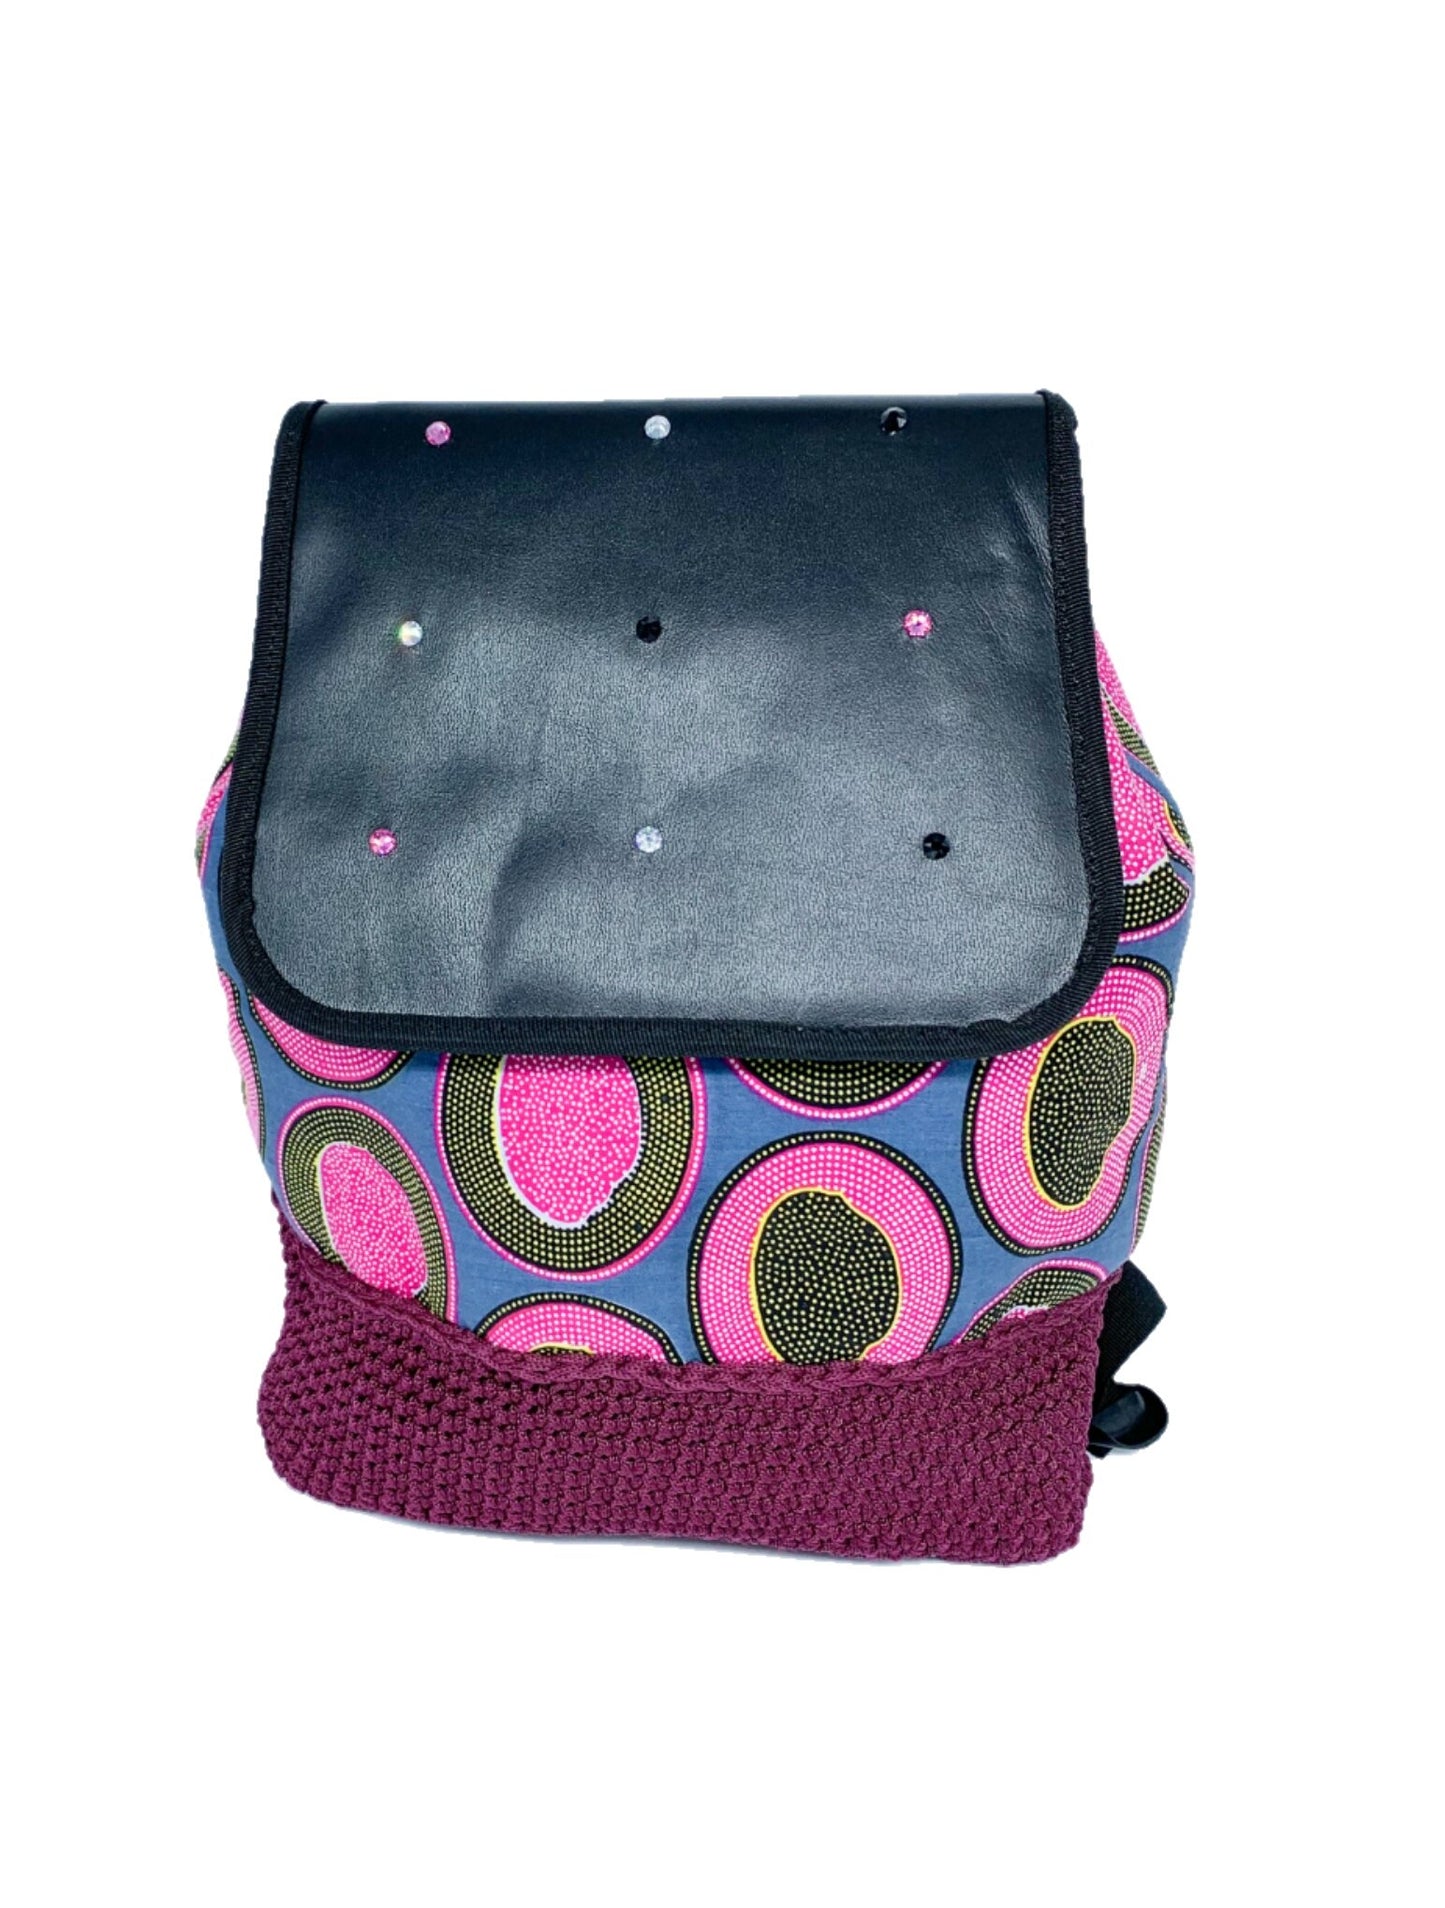 Bea Handcrafted Ankara Leather flap Backpack: Boho Style with Plenty of Room for Adventure